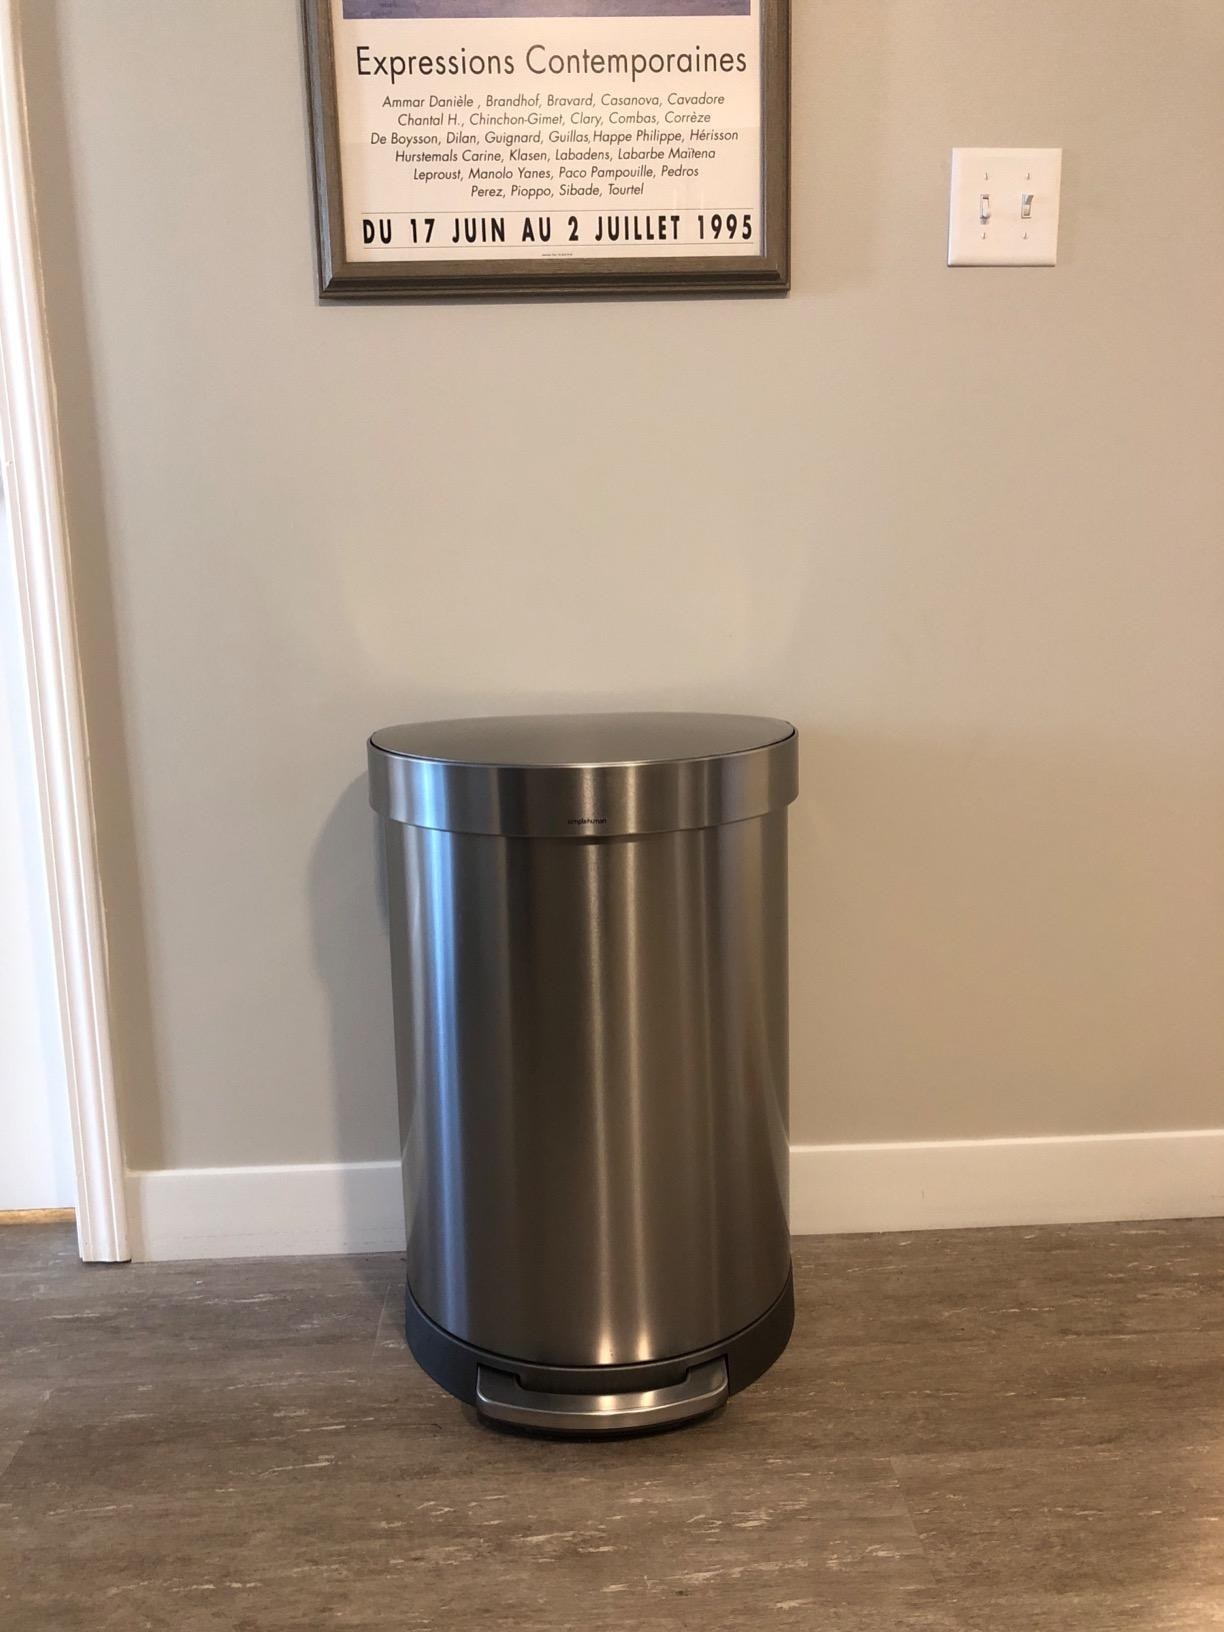 The trash can up against a wall with a stainless steel finish and pedal at the bottom